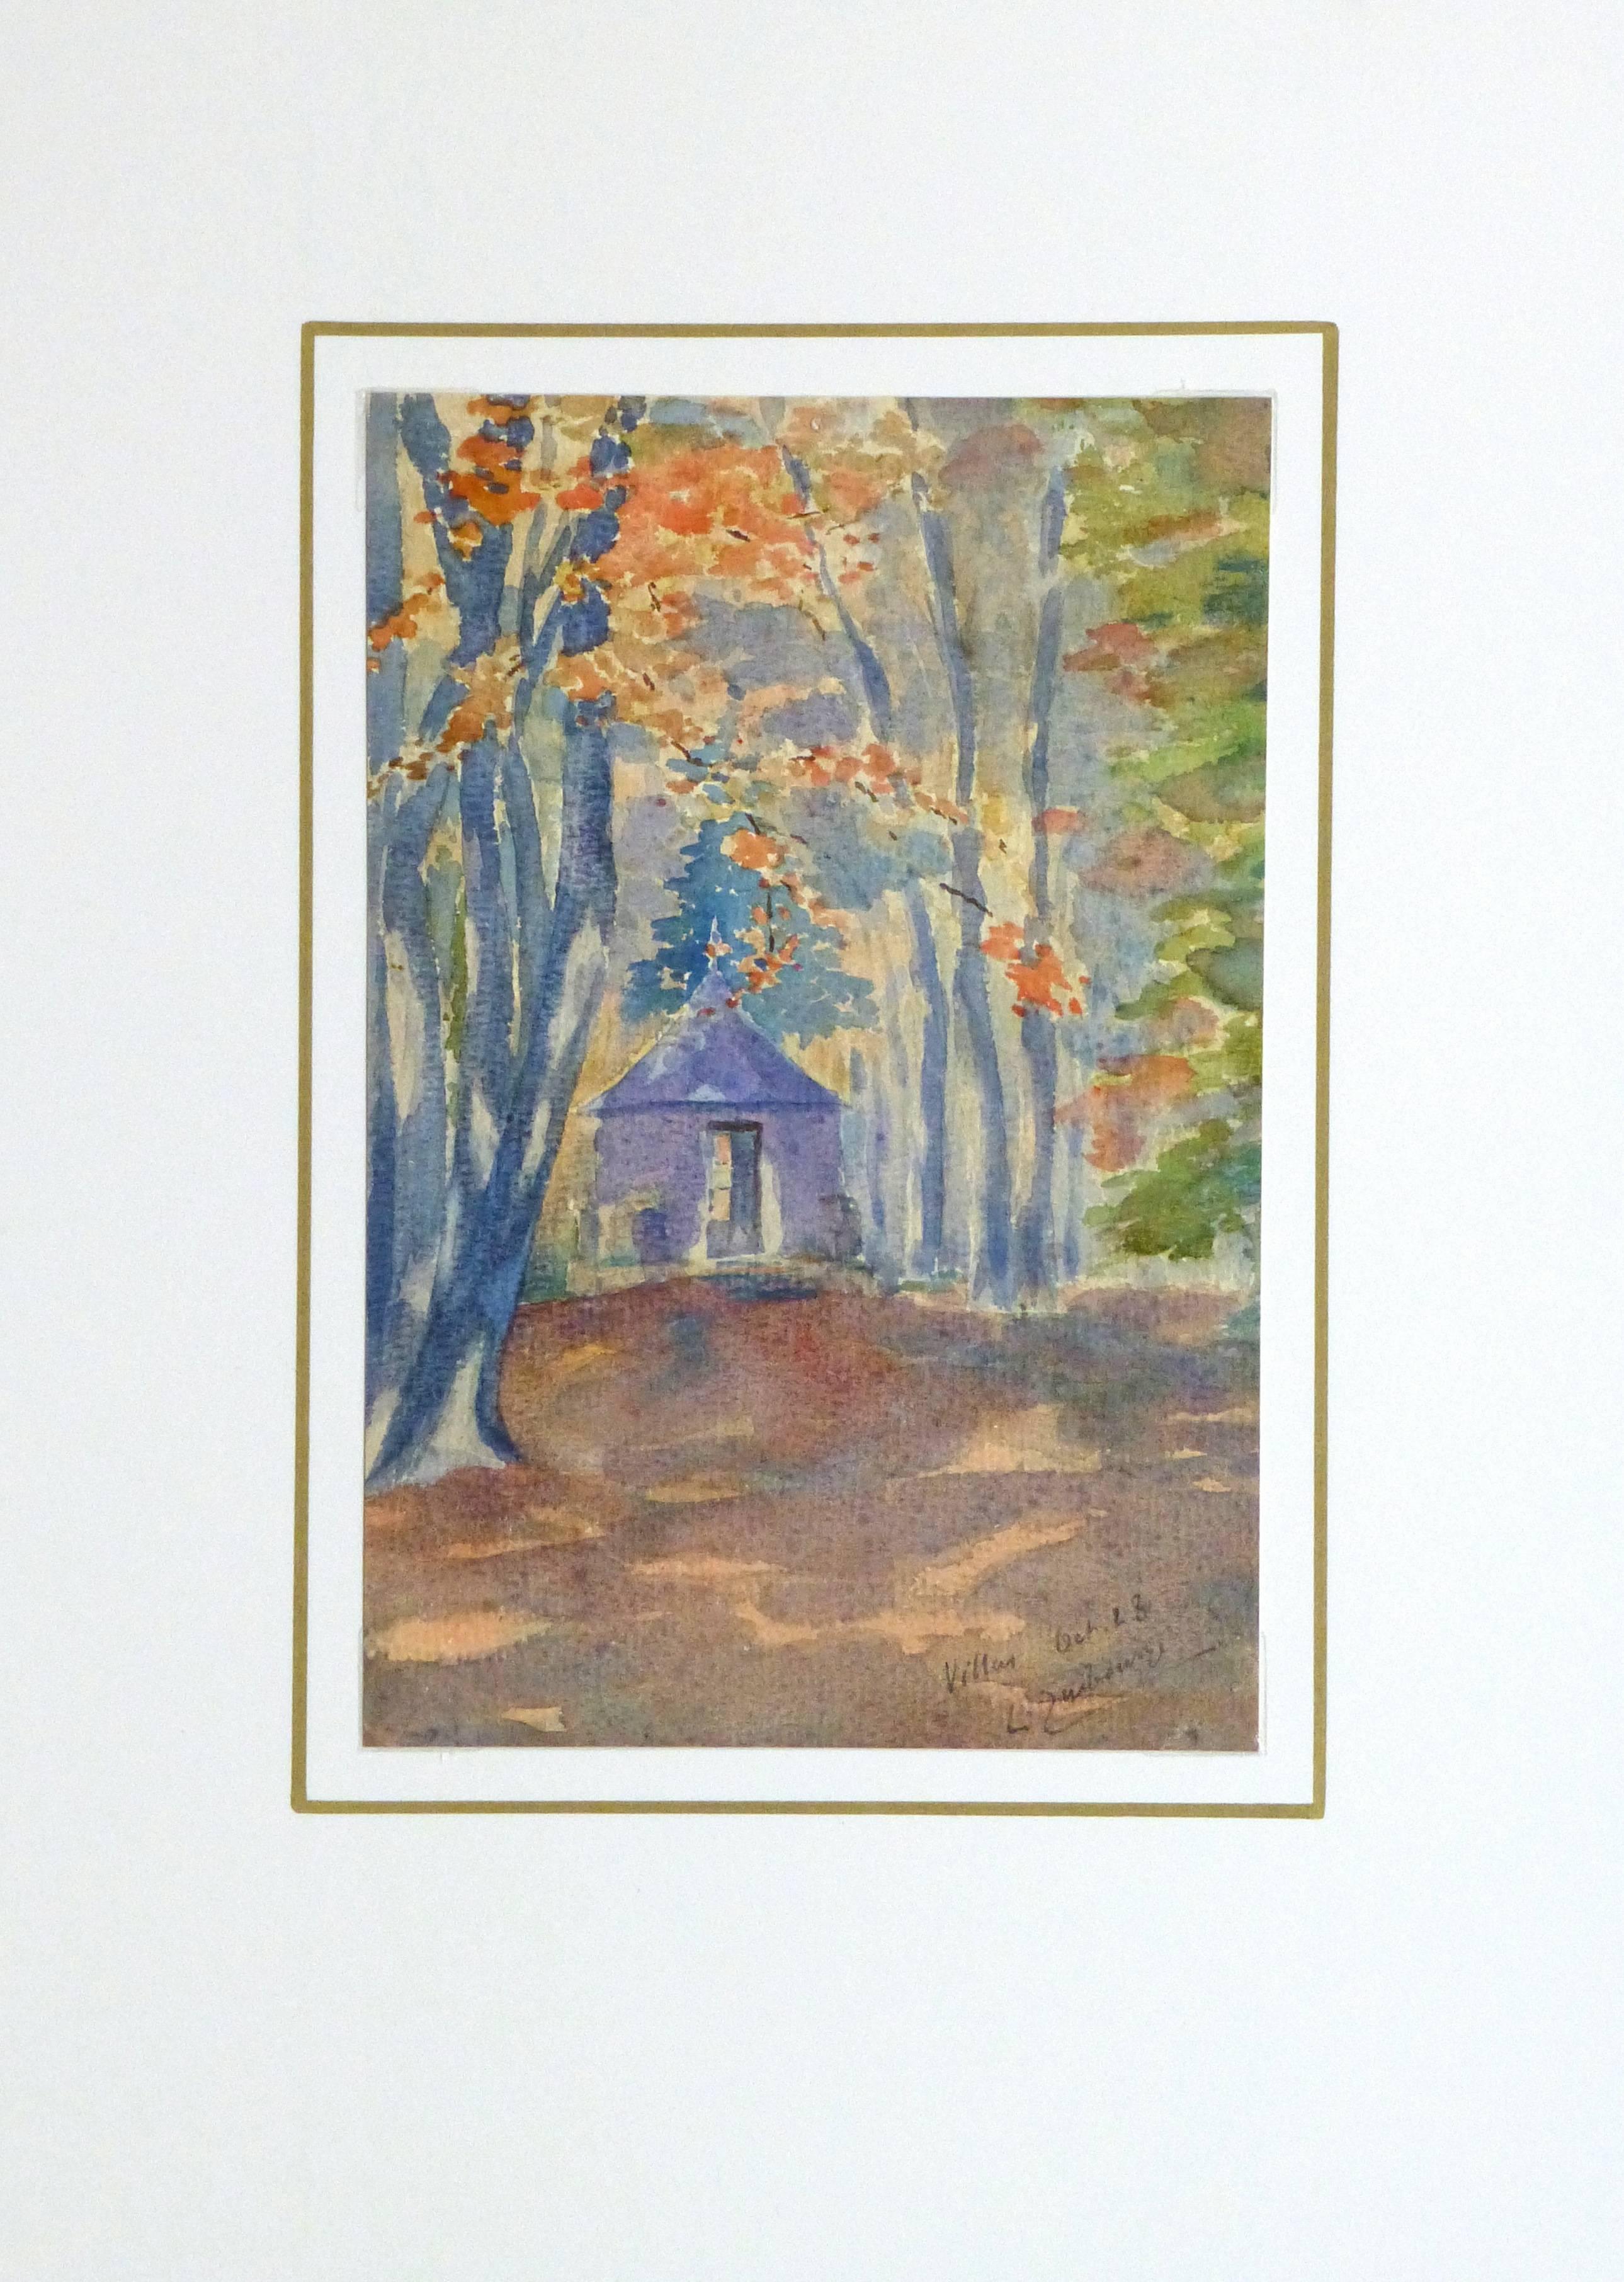 Enchanting watercolor landscape of a circular cabin nestled under autumn foliage, 1928. Signed and dated lower right.

Original artwork on paper displayed on a white mat with a gold border. Archival plastic sleeve and Certificate of Authenticity